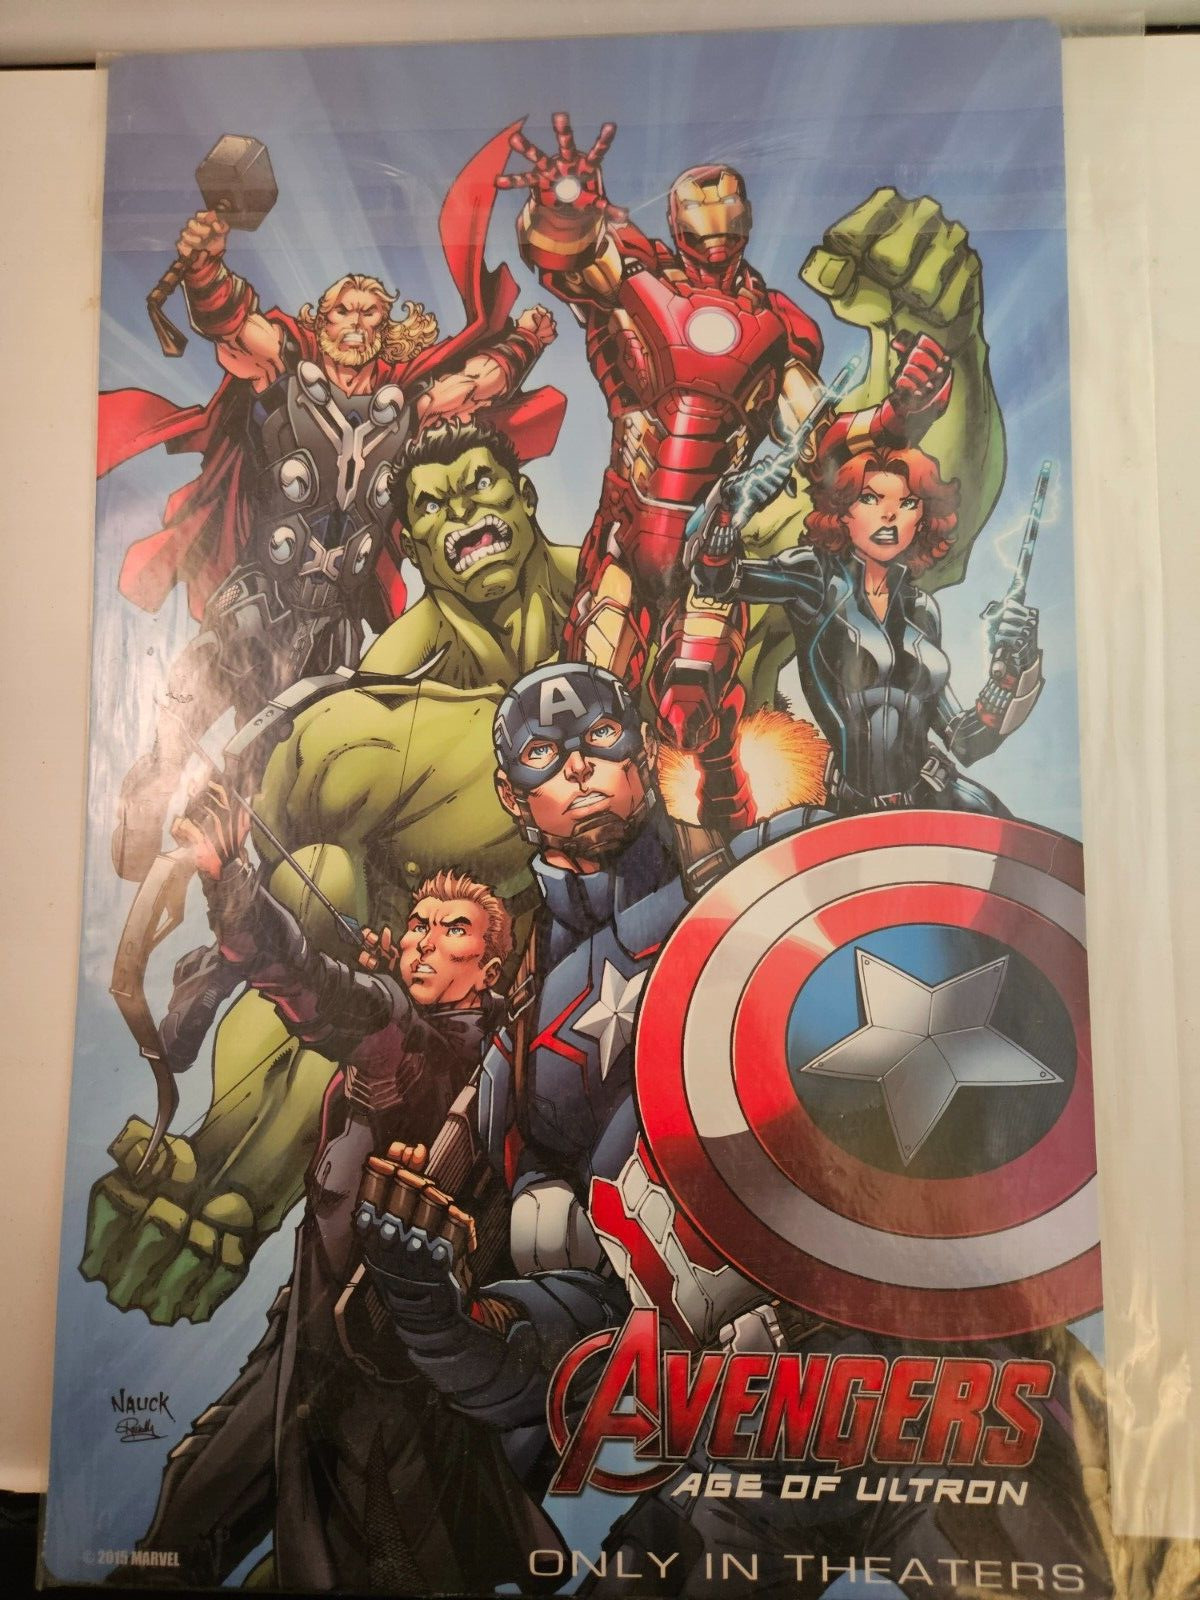 Avengers Age of Ultron Marvel 2015 Movie Print Poster Sealed (MINT)